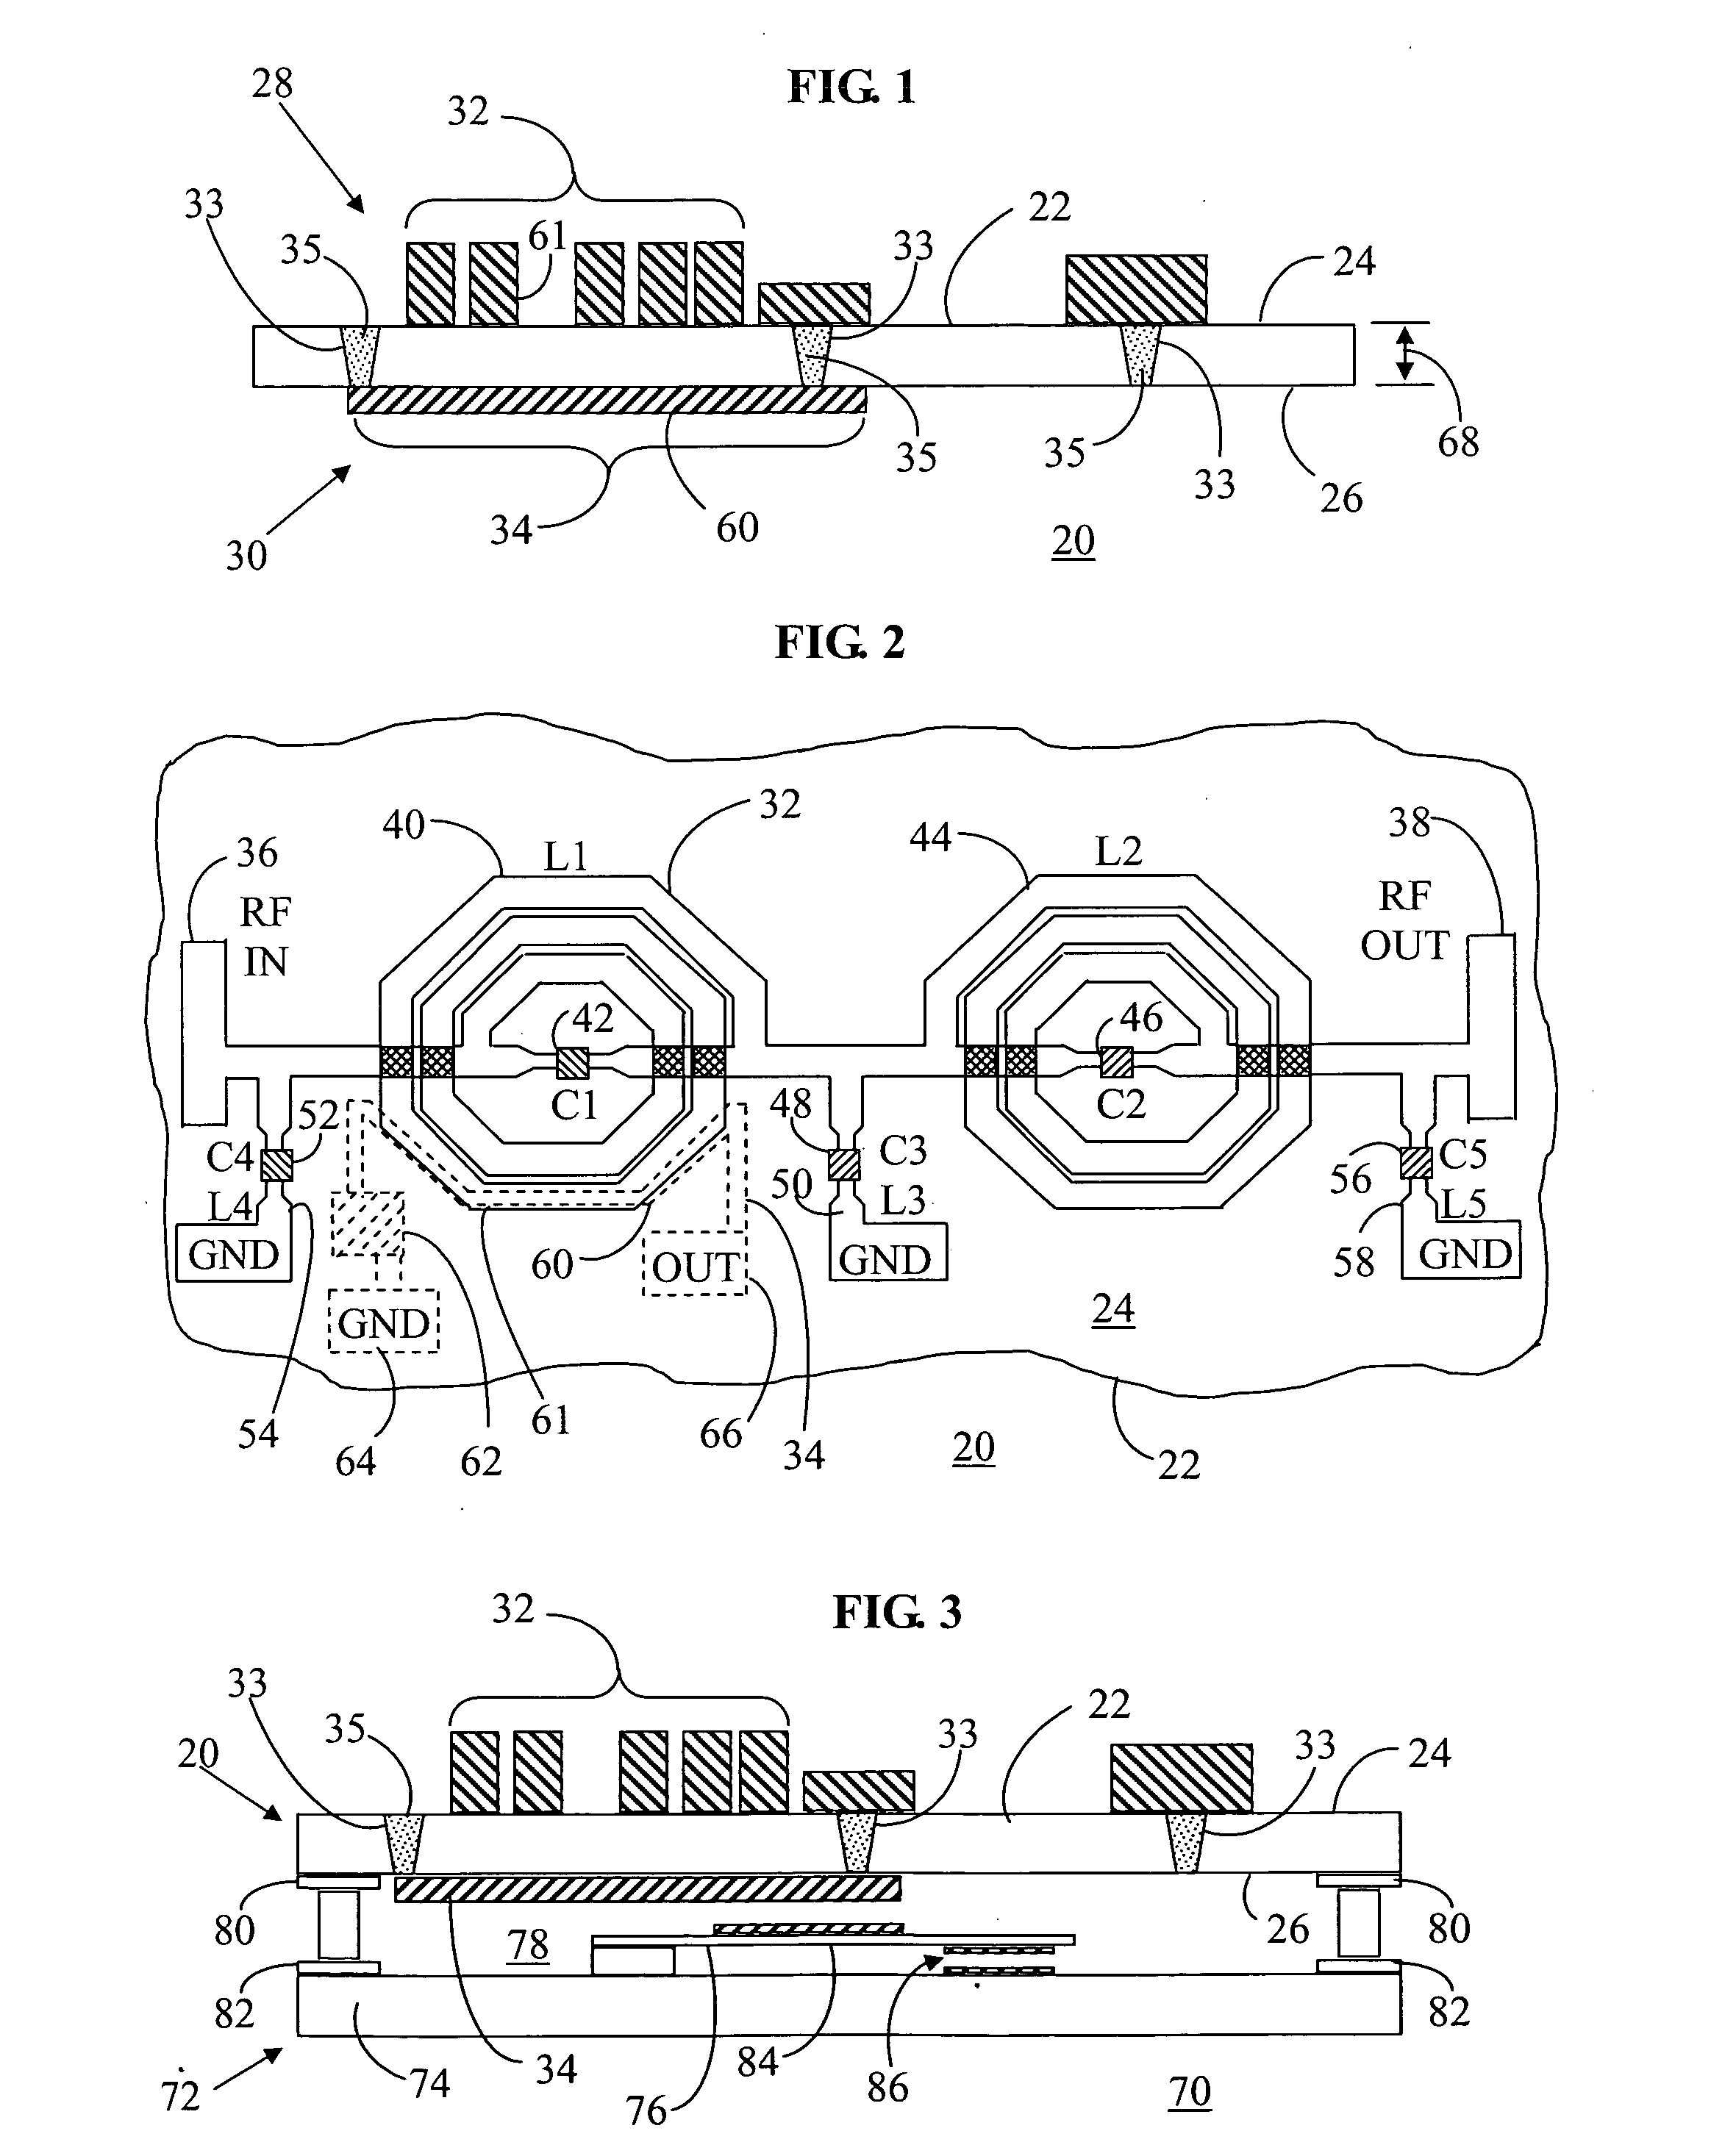 Three dimensional integrated passive device and method of fabrication